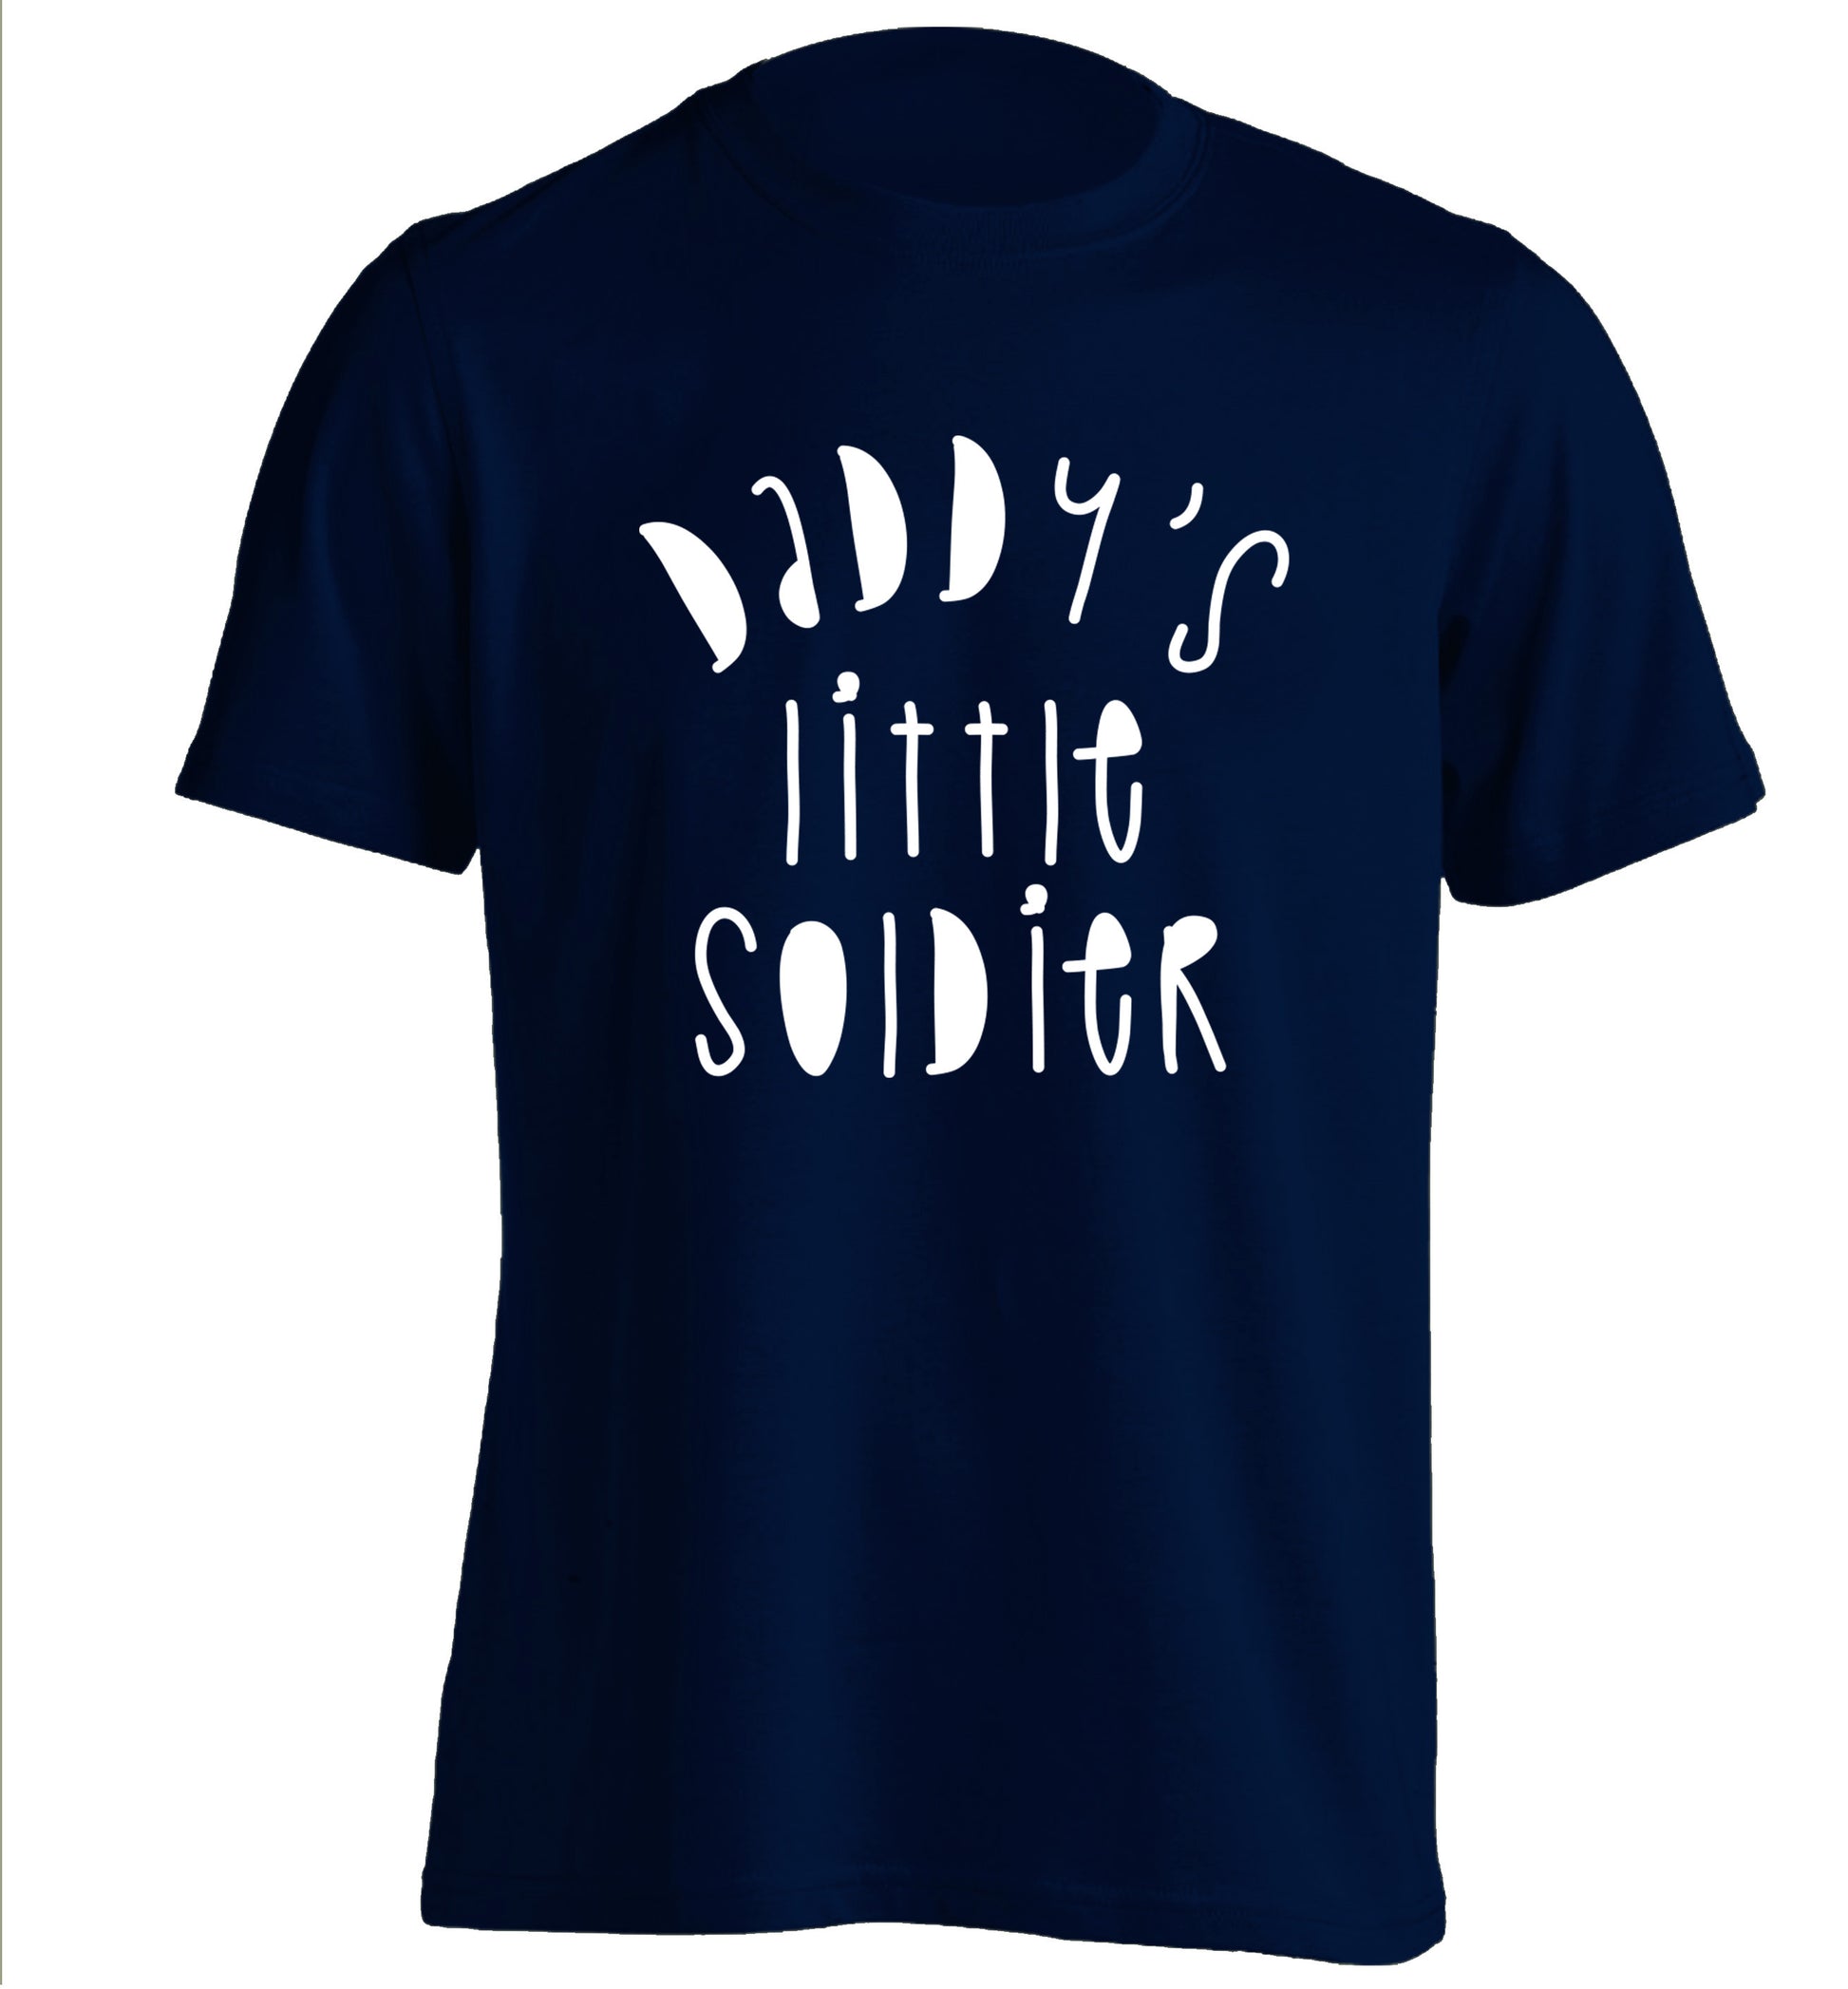 Daddy's little soldier adults unisex navy Tshirt 2XL